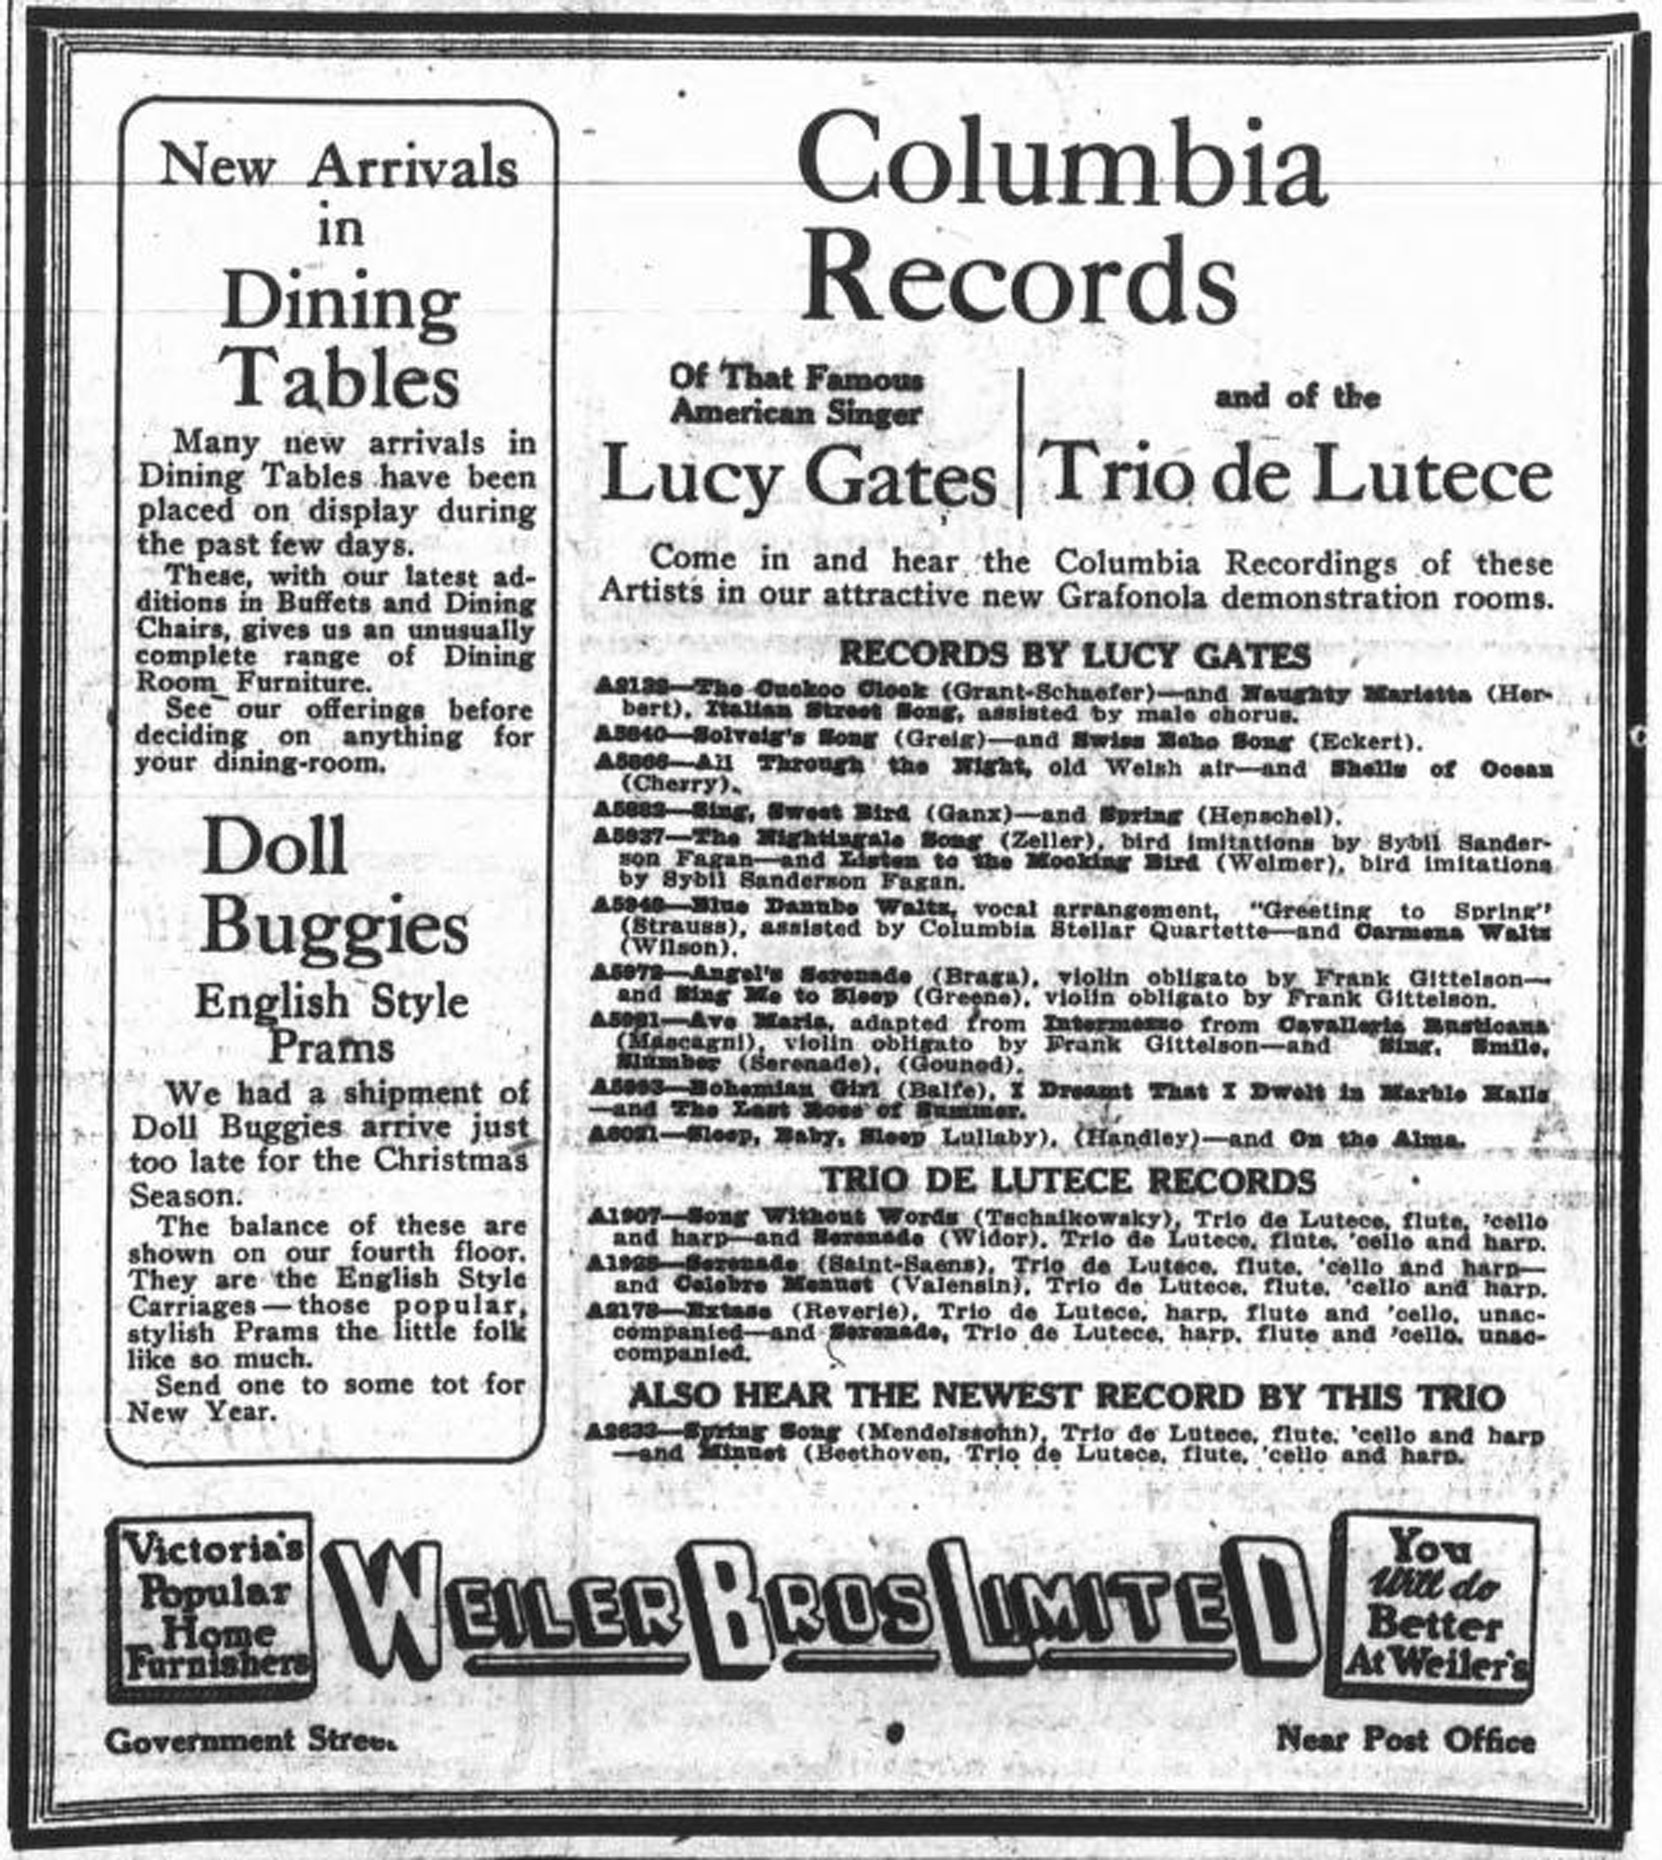 1919 advertisement for Columbia Records at Weiler Brothers, 921 Government Street (Victoria Online Sightseeing Tours collection)